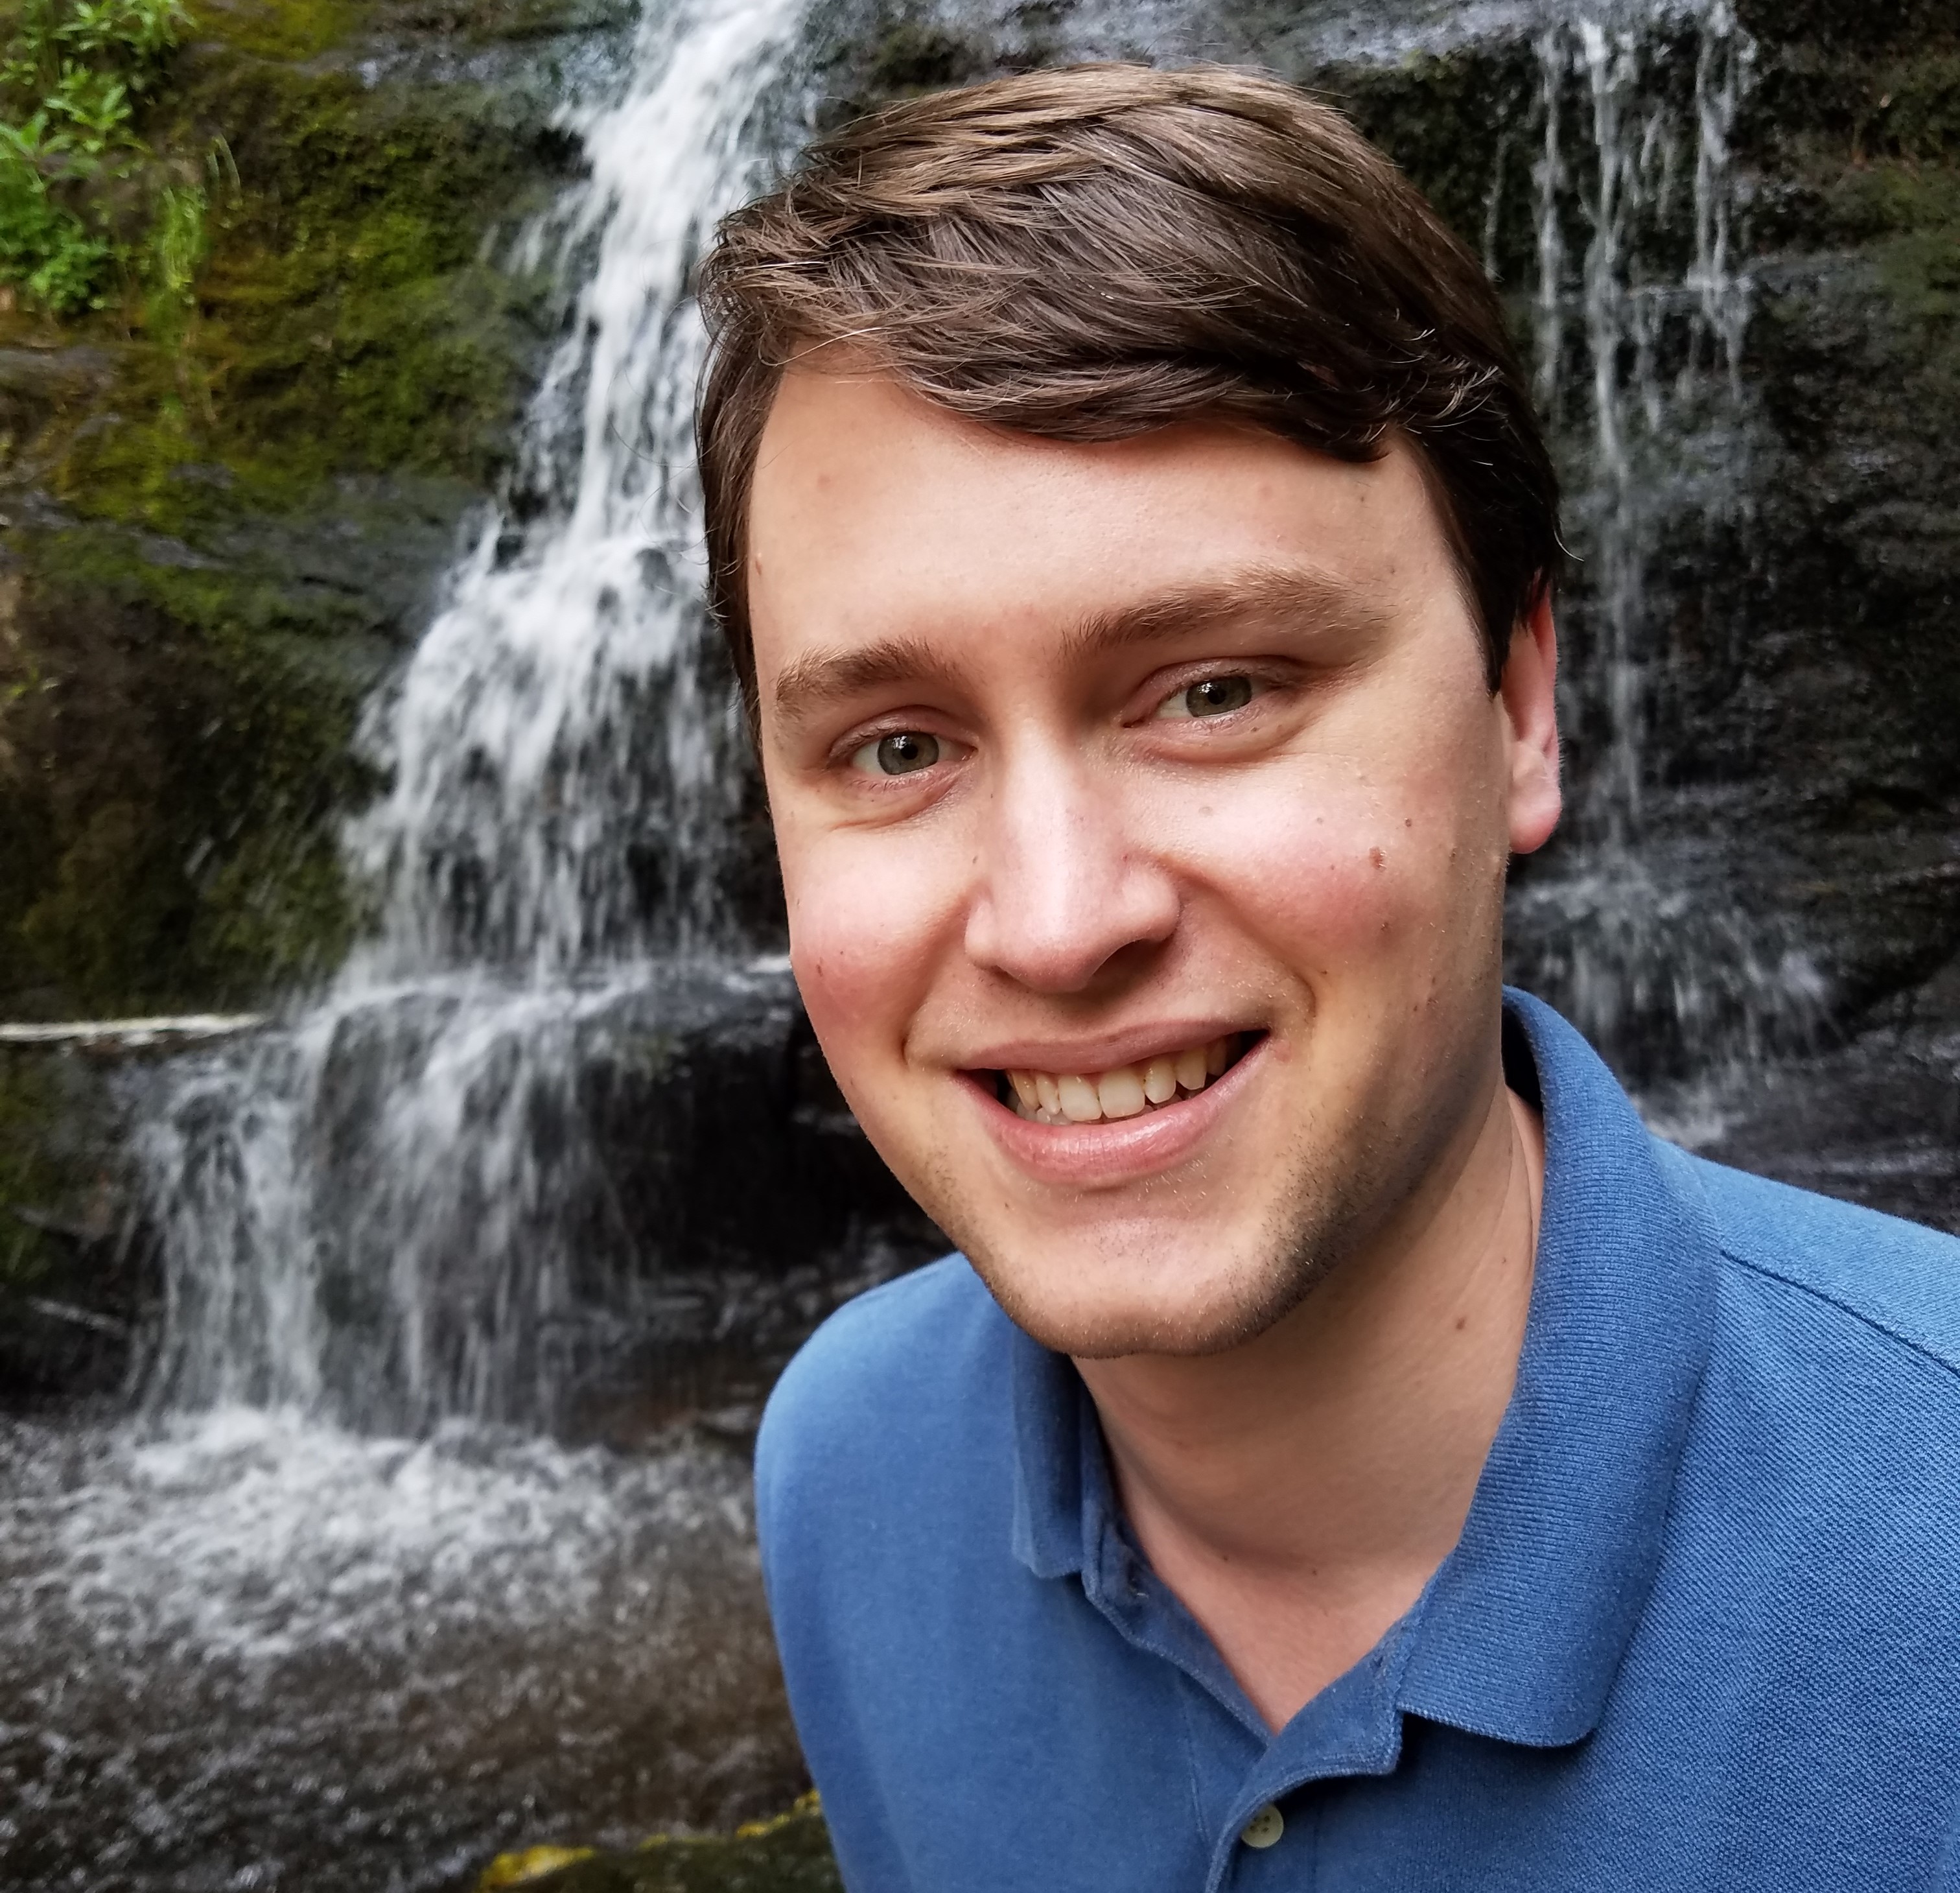 Portrait of the developer in a blue shirt by a waterfall.